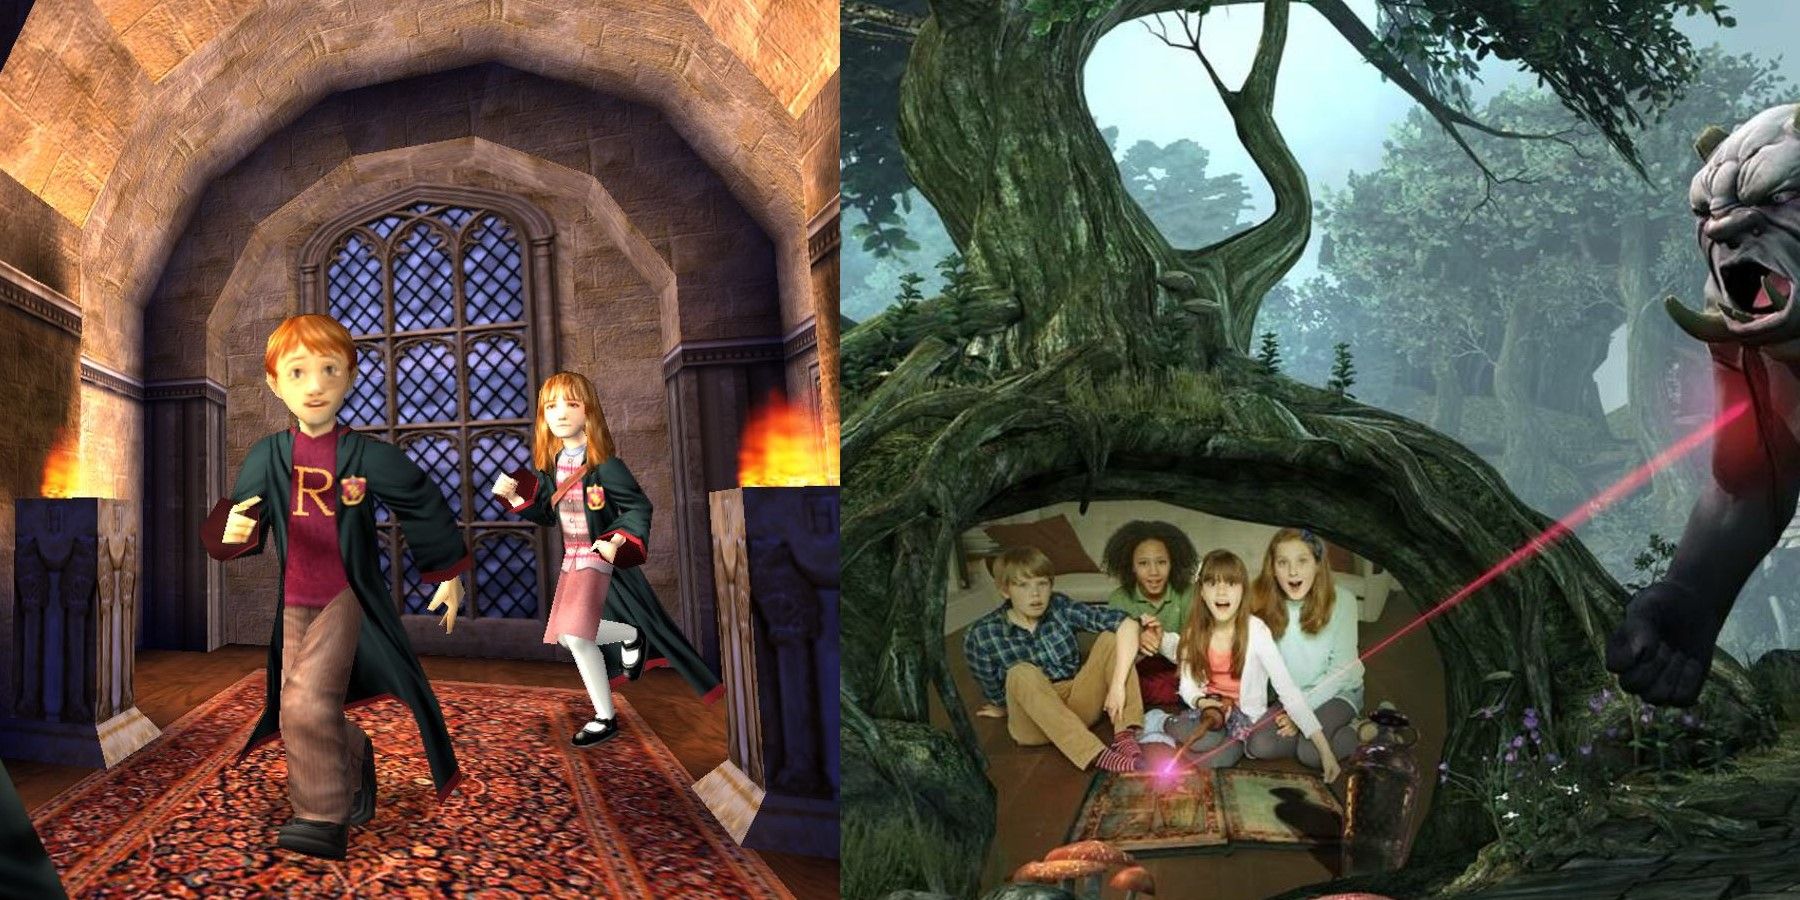 Two side by side images of The Sorcerer’s Stone (PC Version) and Wonderbook Book of Potions games.